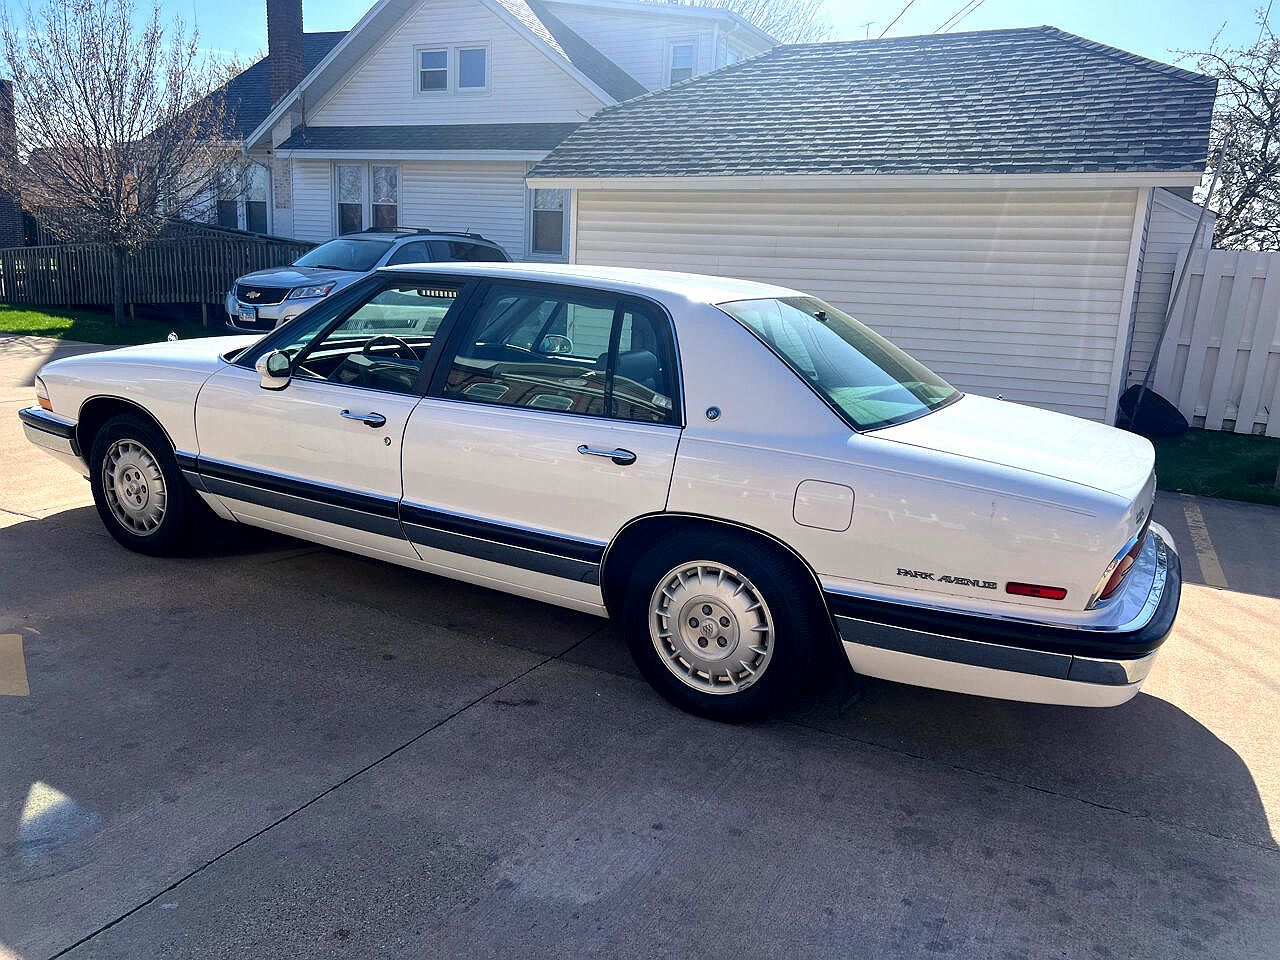 1994 Buick Park Avenue null image 9